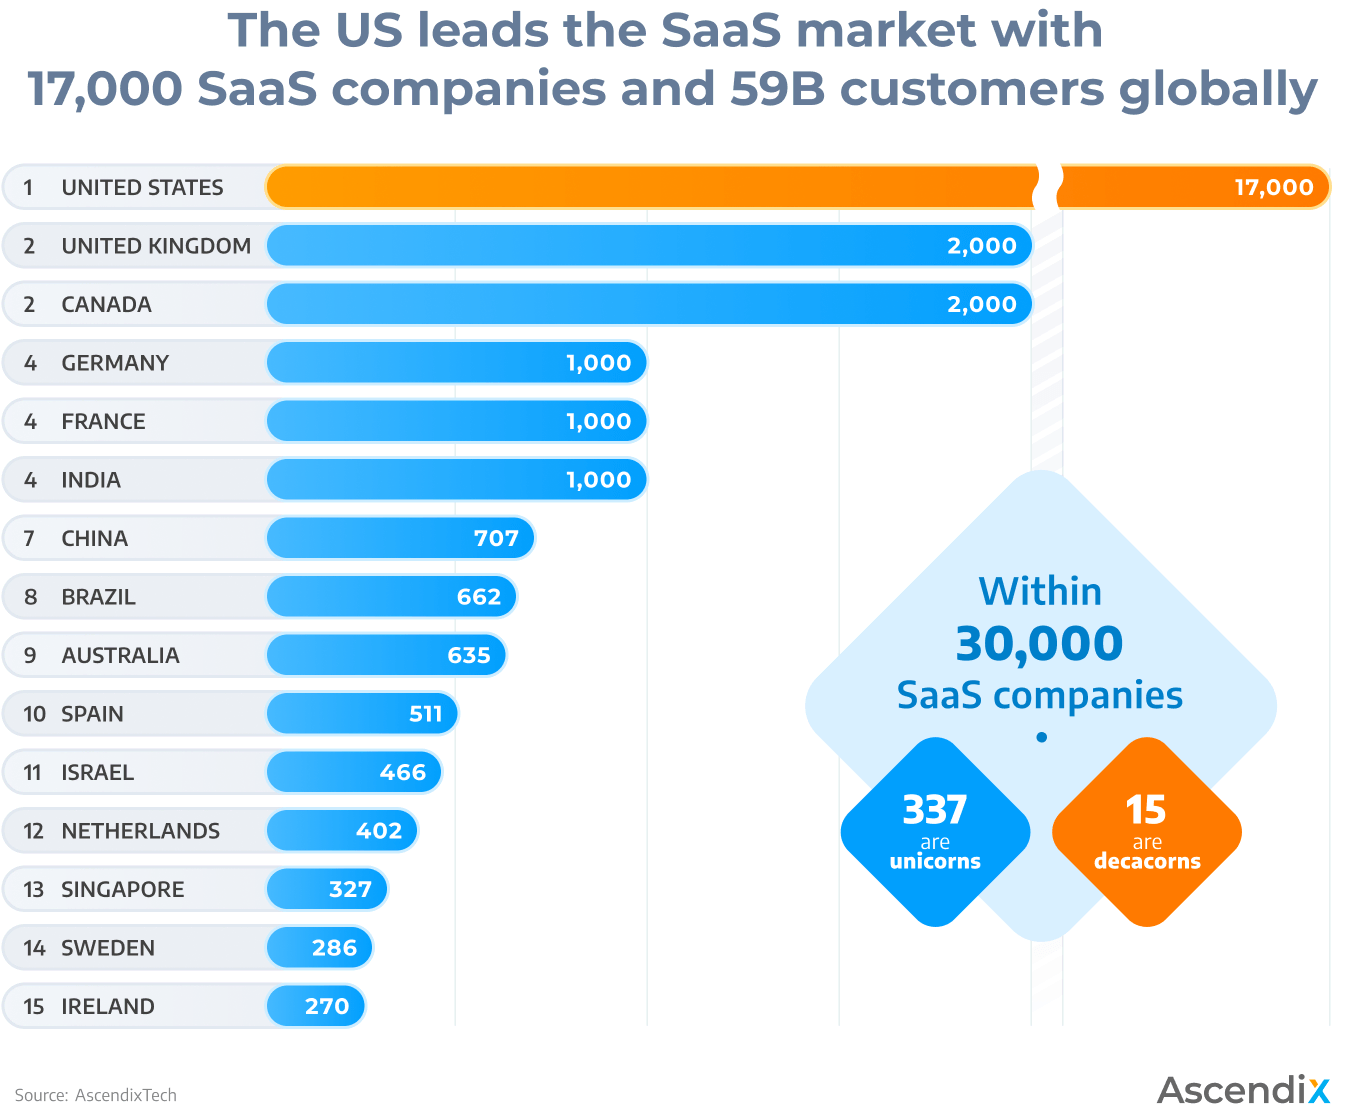 Number of SaaS Companies by Country